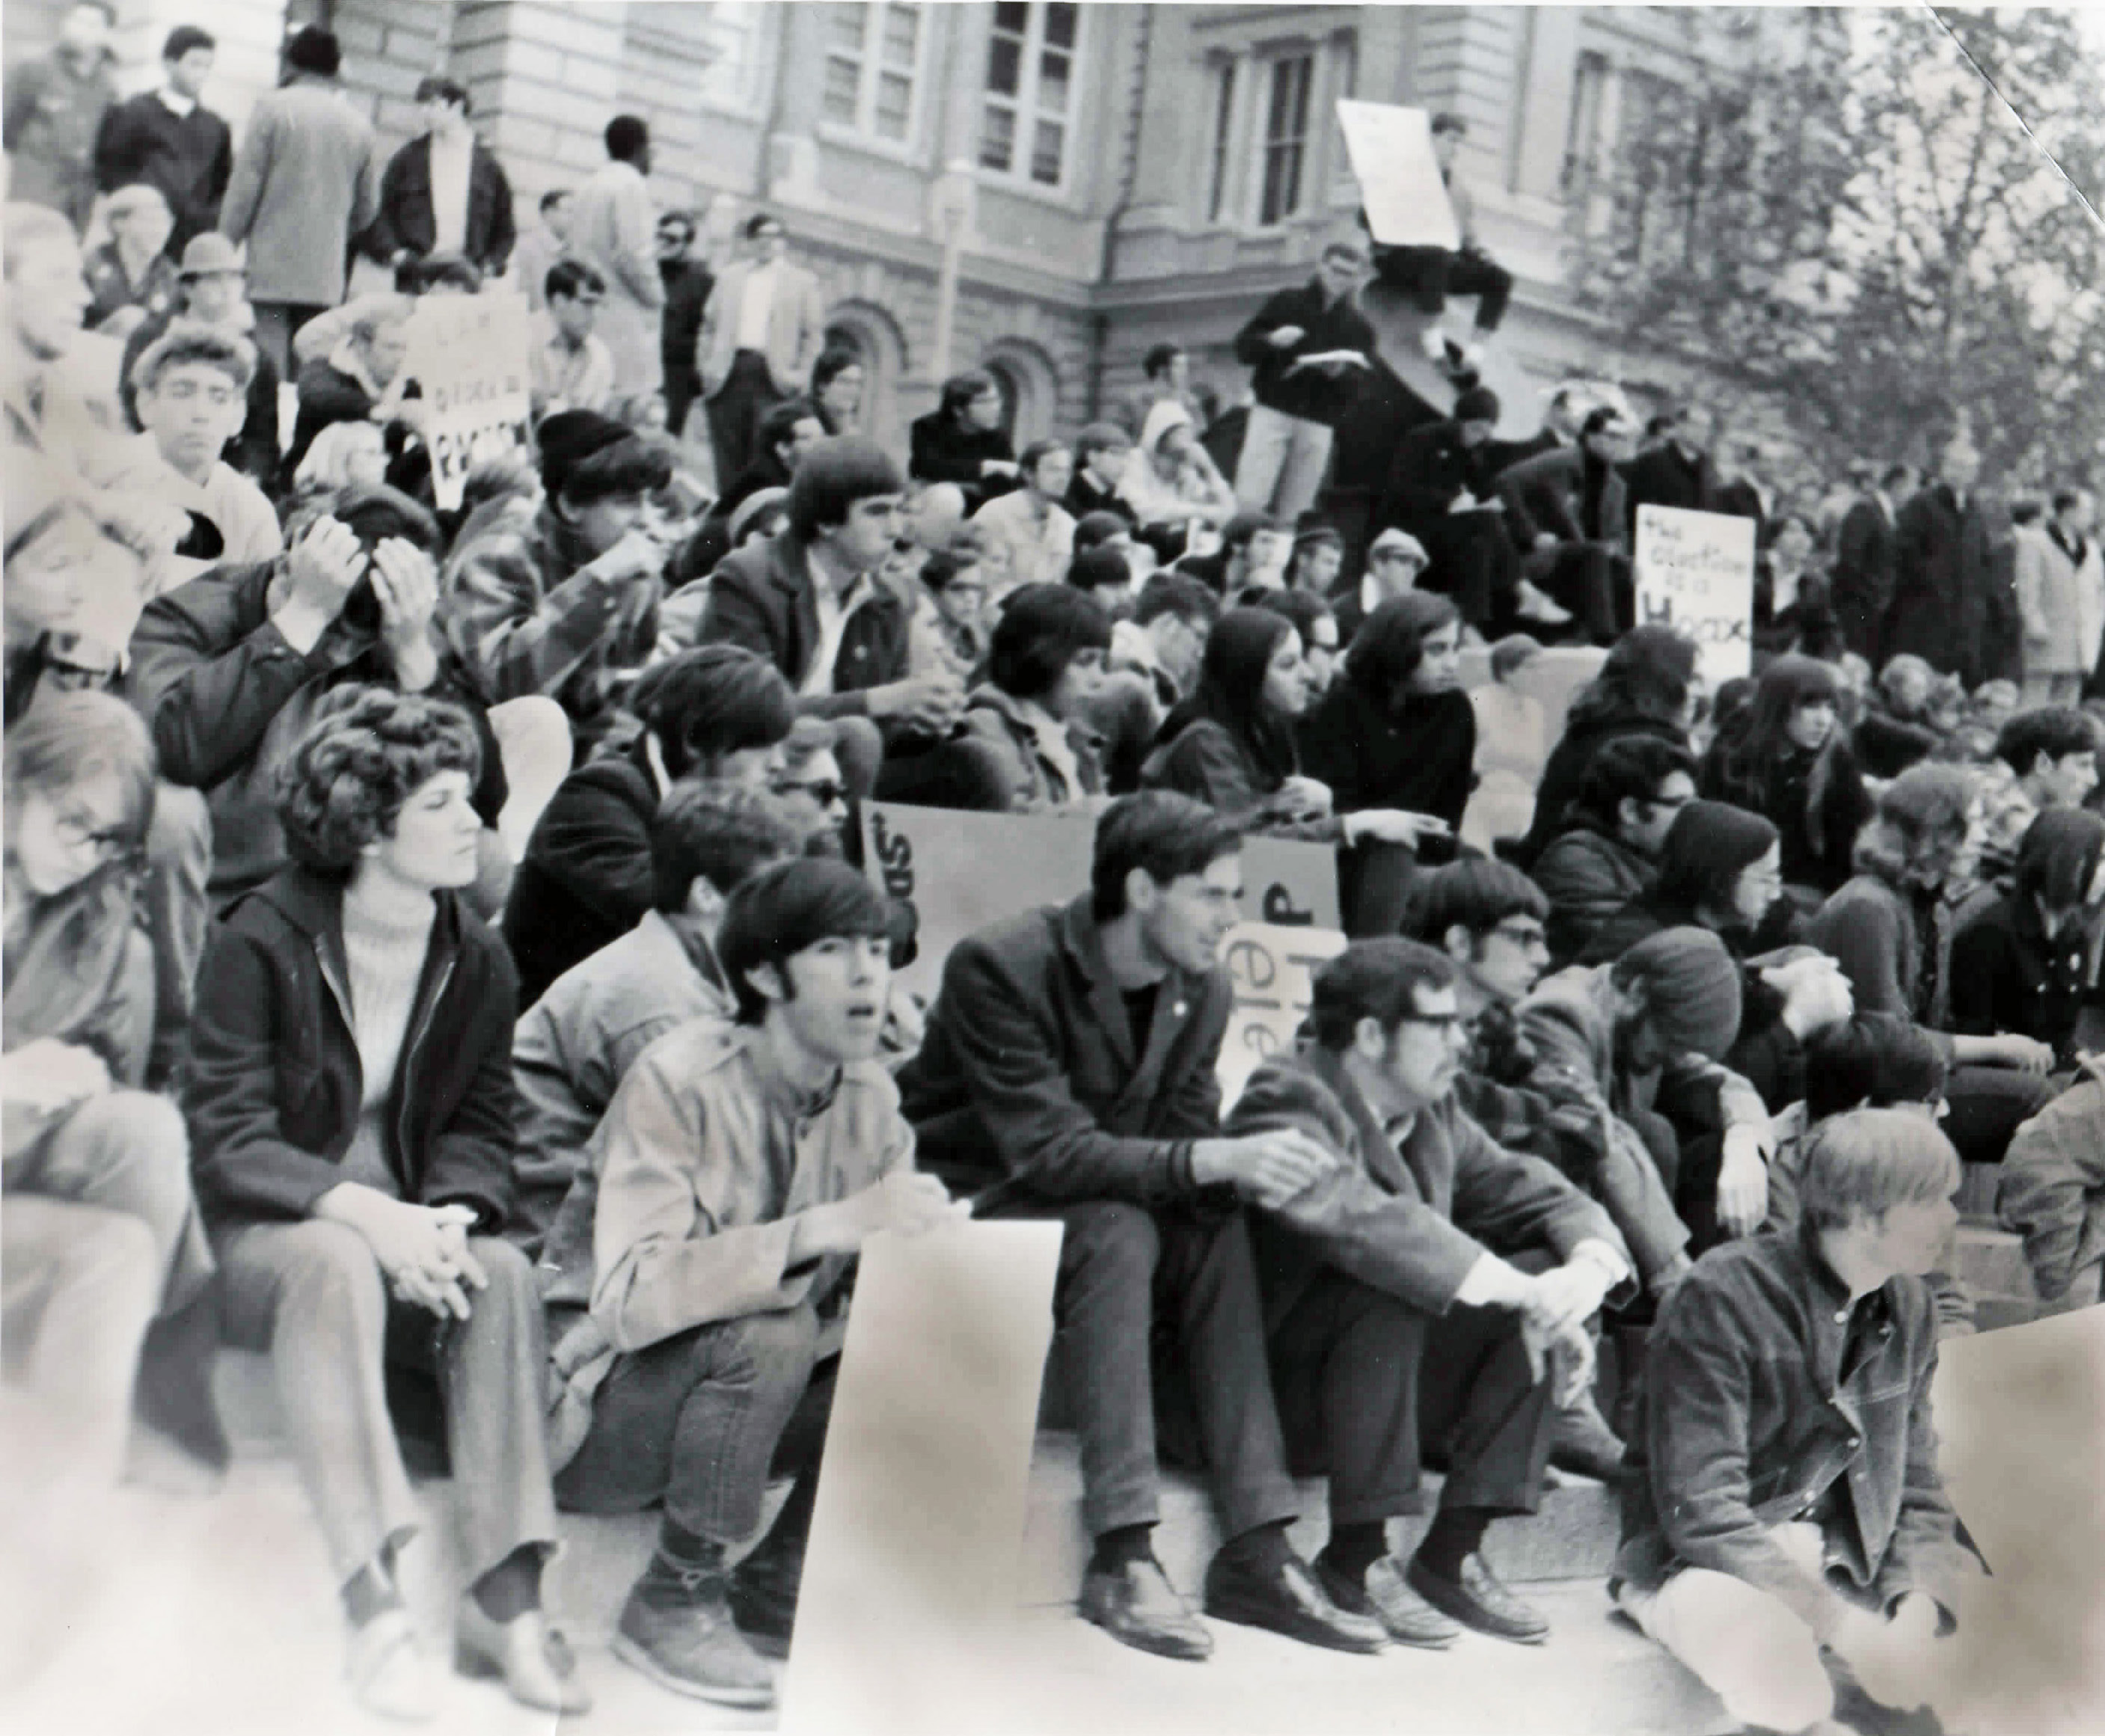 Protest against the Vietnam war in 1968, at Drake University